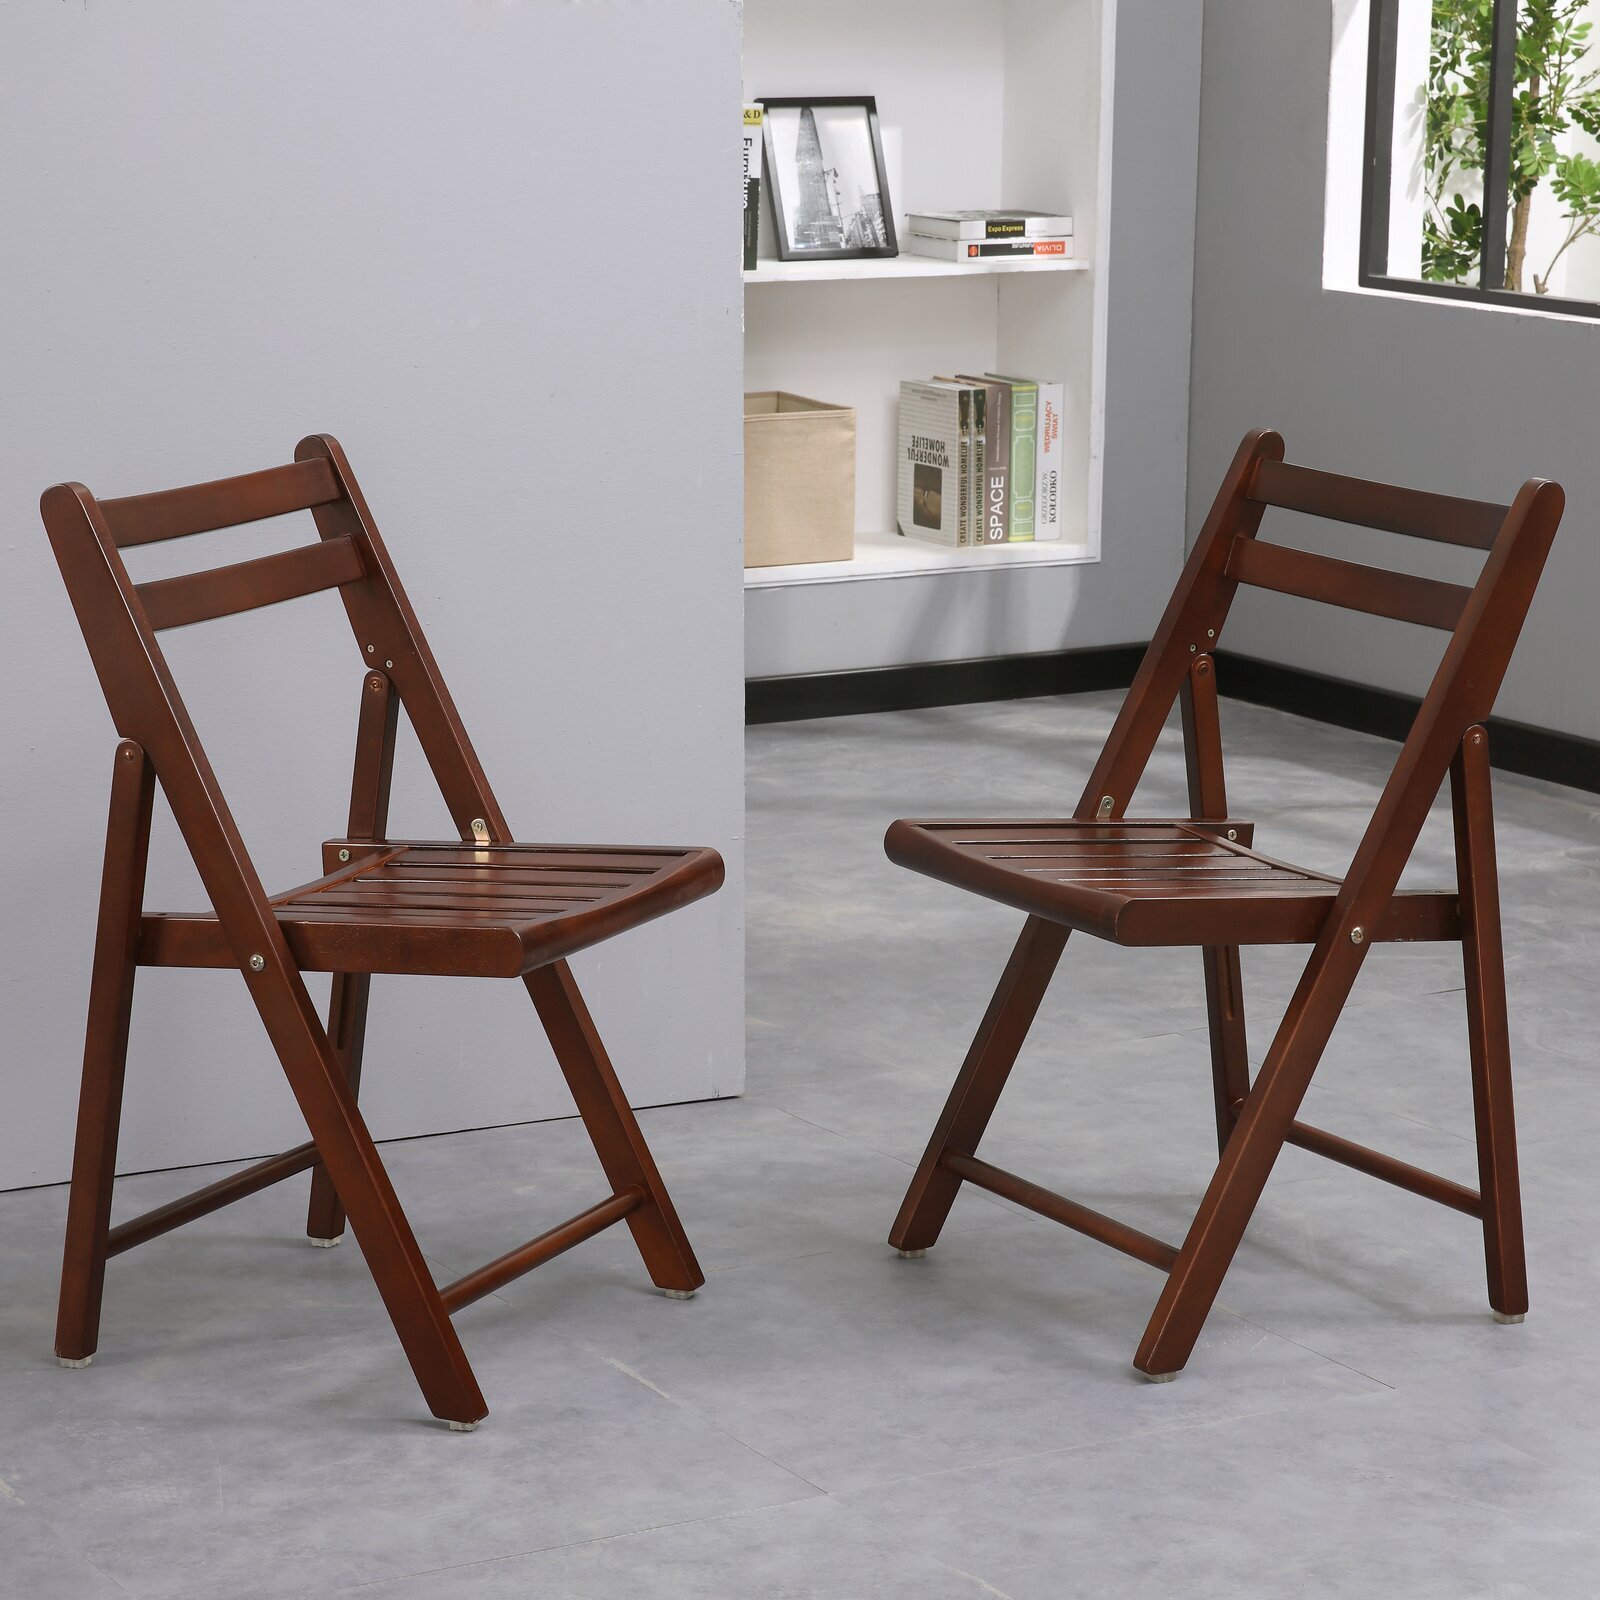 Wooden folding dining chairs